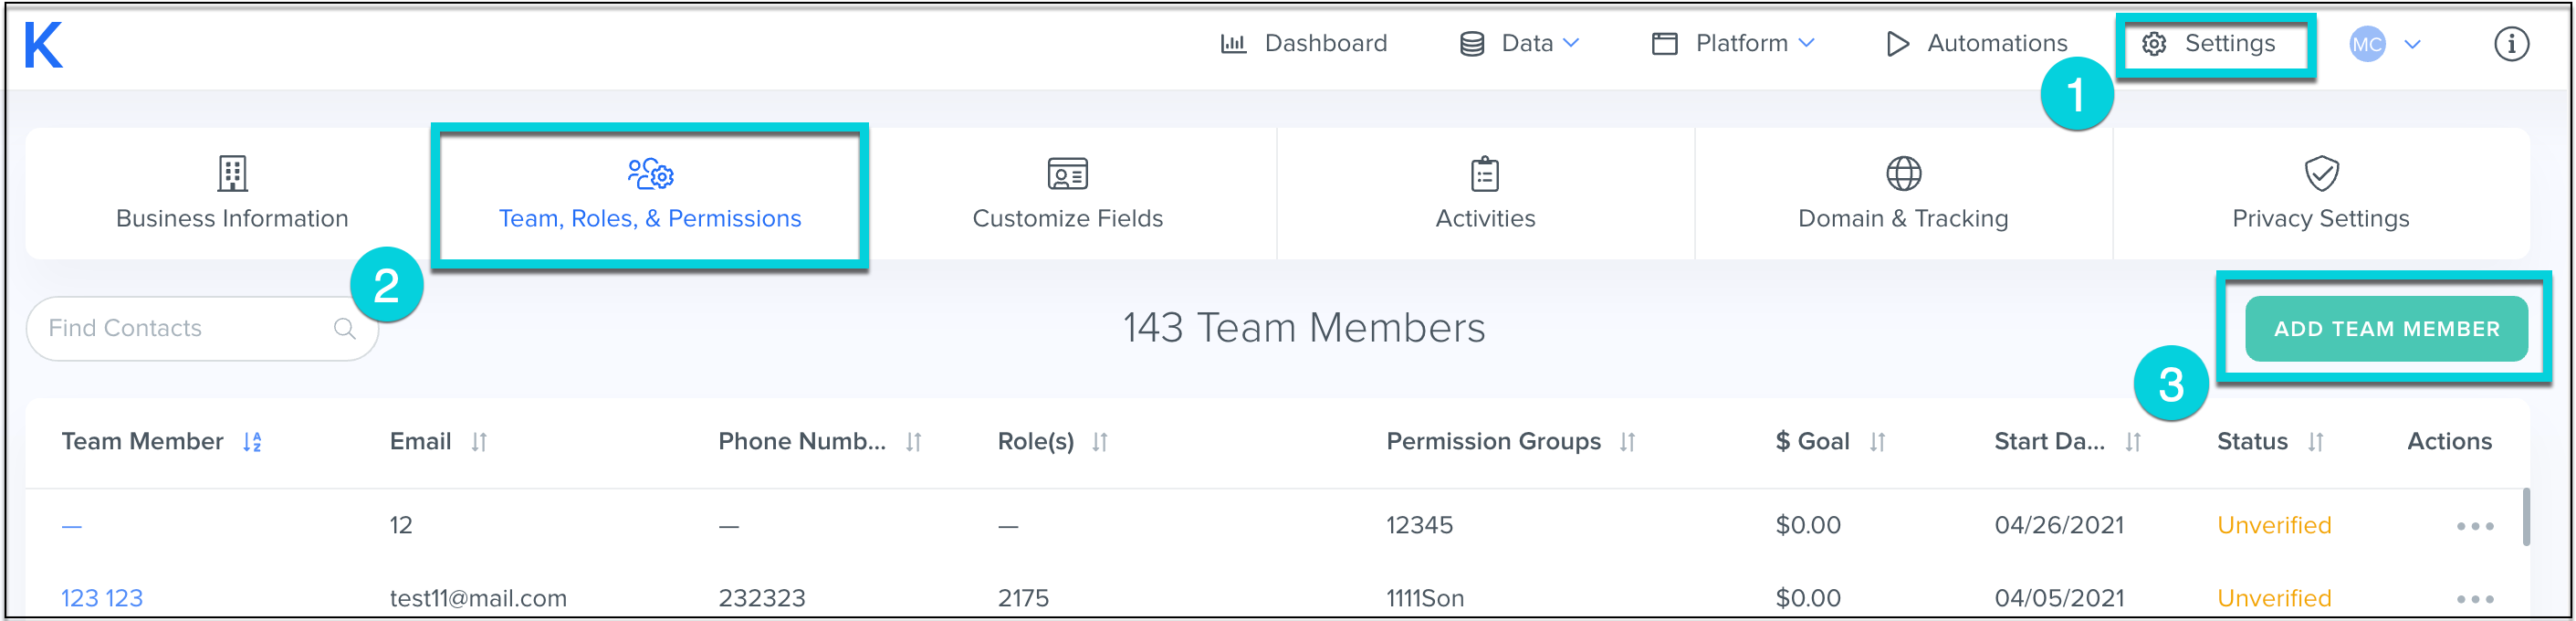 Adding_Team_Members_to_your_account.png